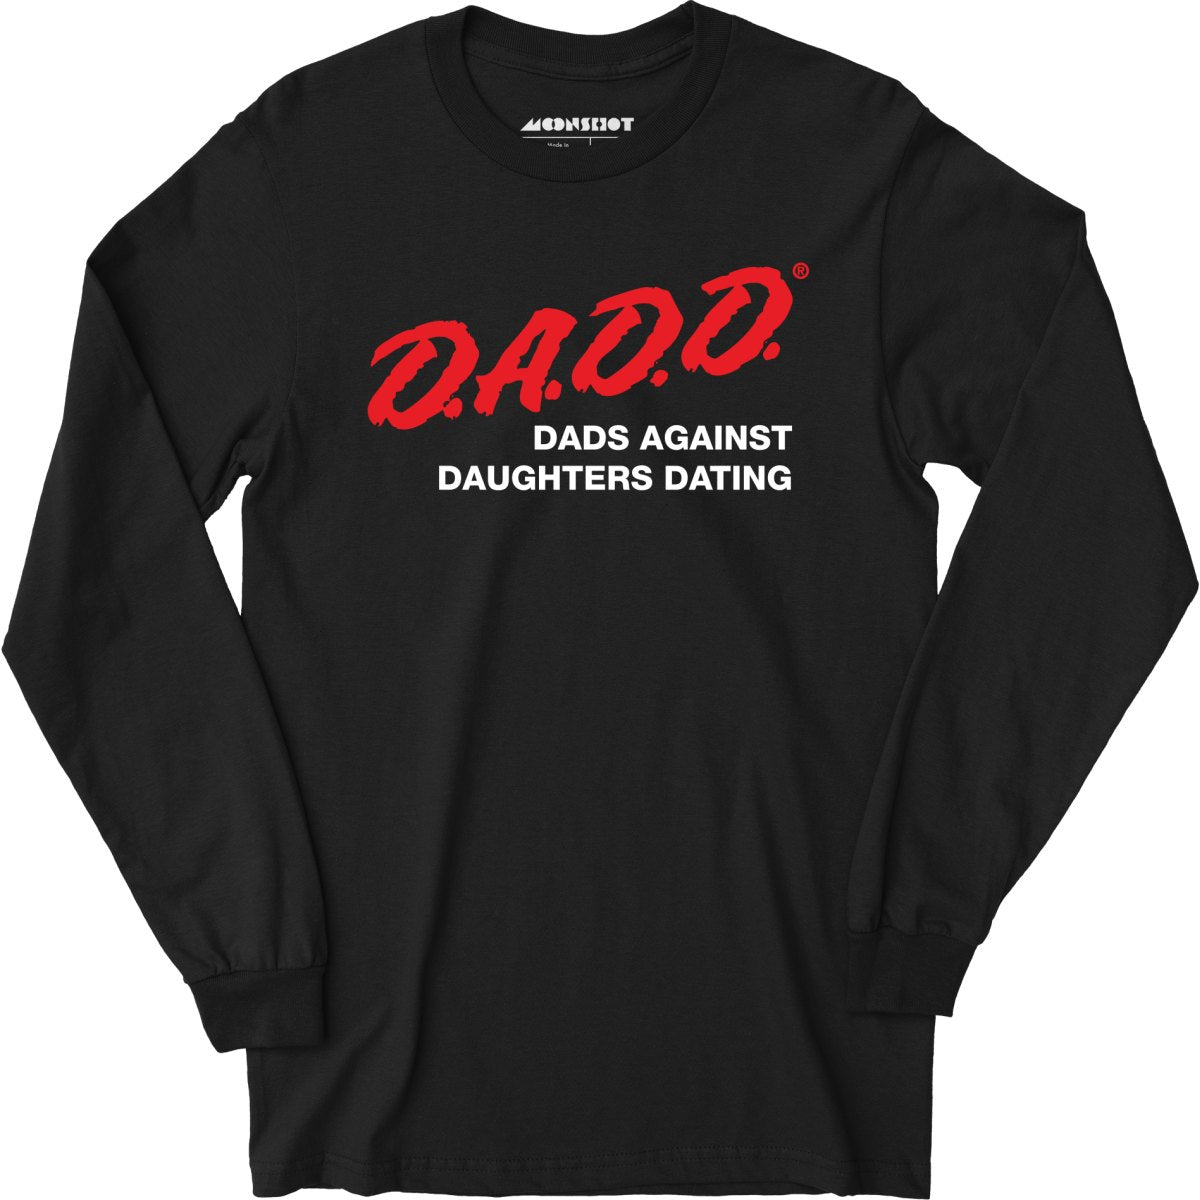 Dads Against Daughters Dating - Long Sleeve T-Shirt